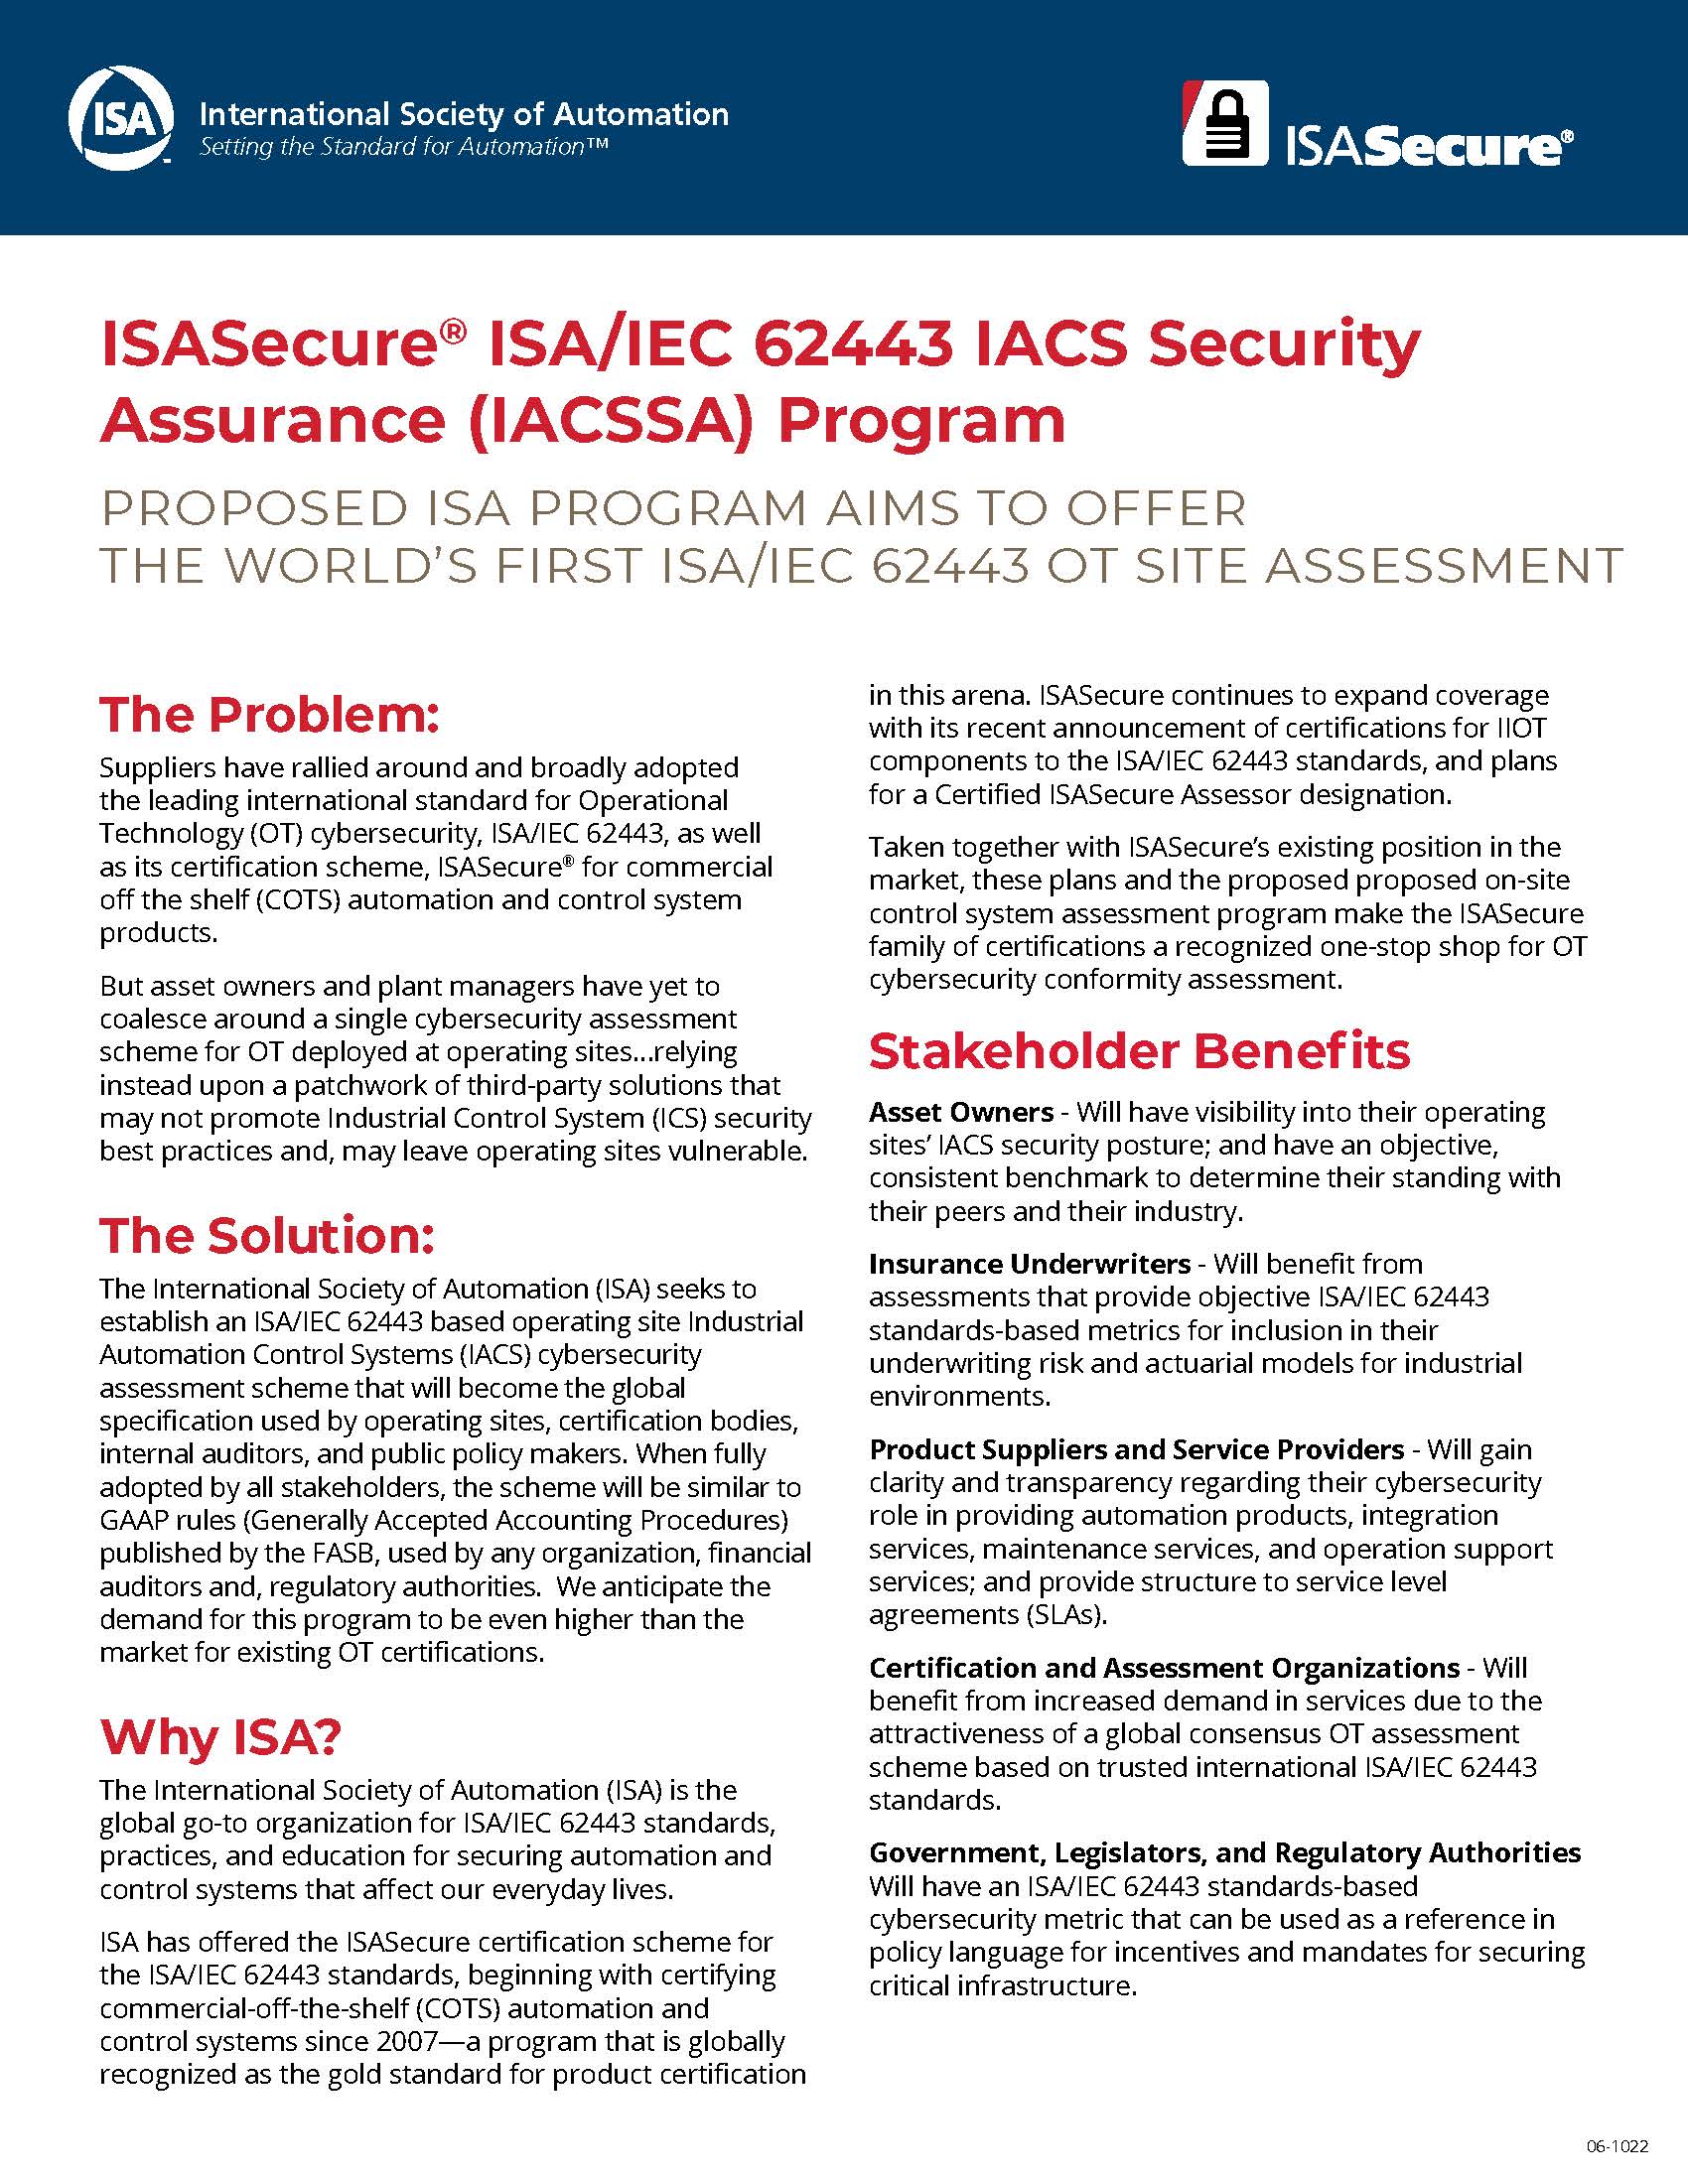 ISASecure_Site_Assessment_Flyer_cover